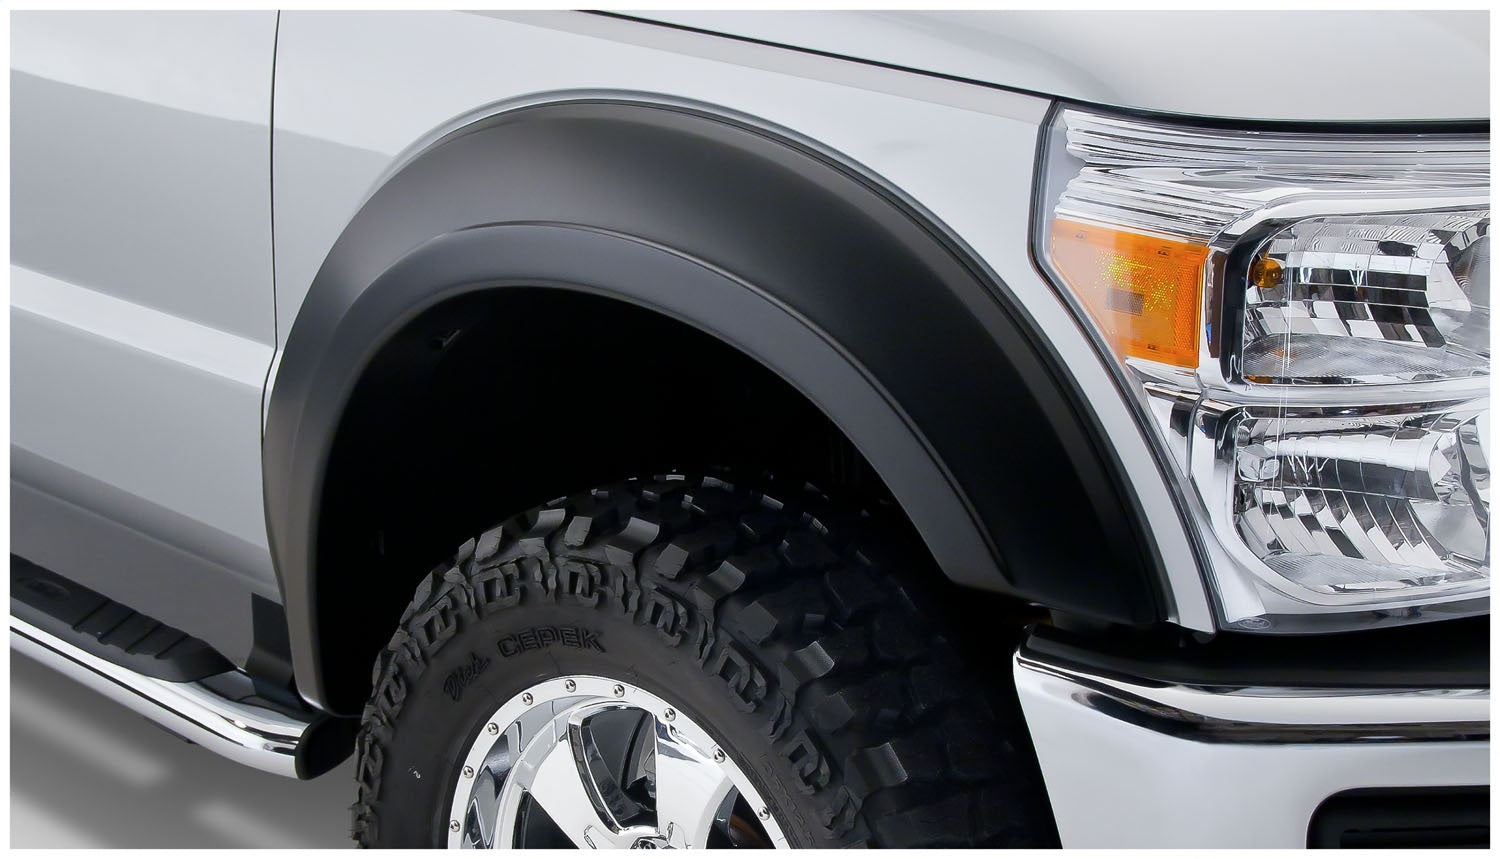 Bushwacker 20085-02 Black Extend-A-Fender Style Smooth Finish Front Fender Flares for 2011-2016 Ford F-250 & F-350 Super Duty (Excludes Dually)